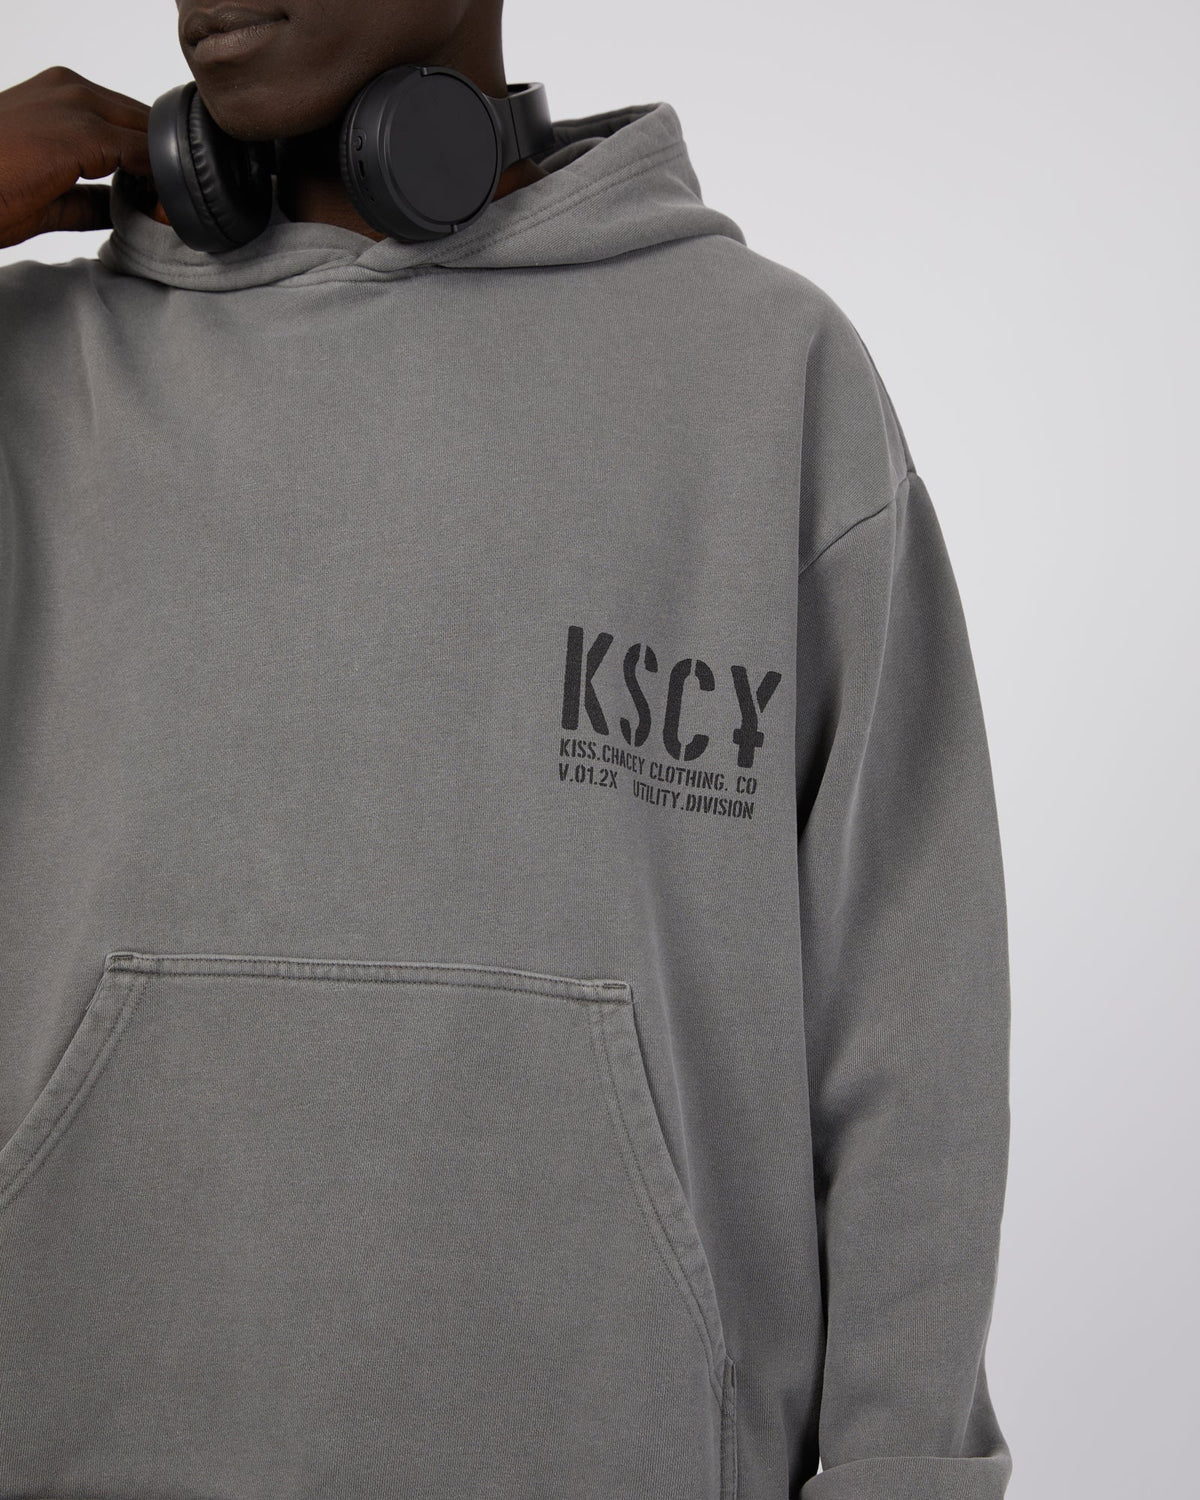 Kiss Chacey-Efficacy Heavy Hooded Sweater Pigment Steel-Edge Clothing